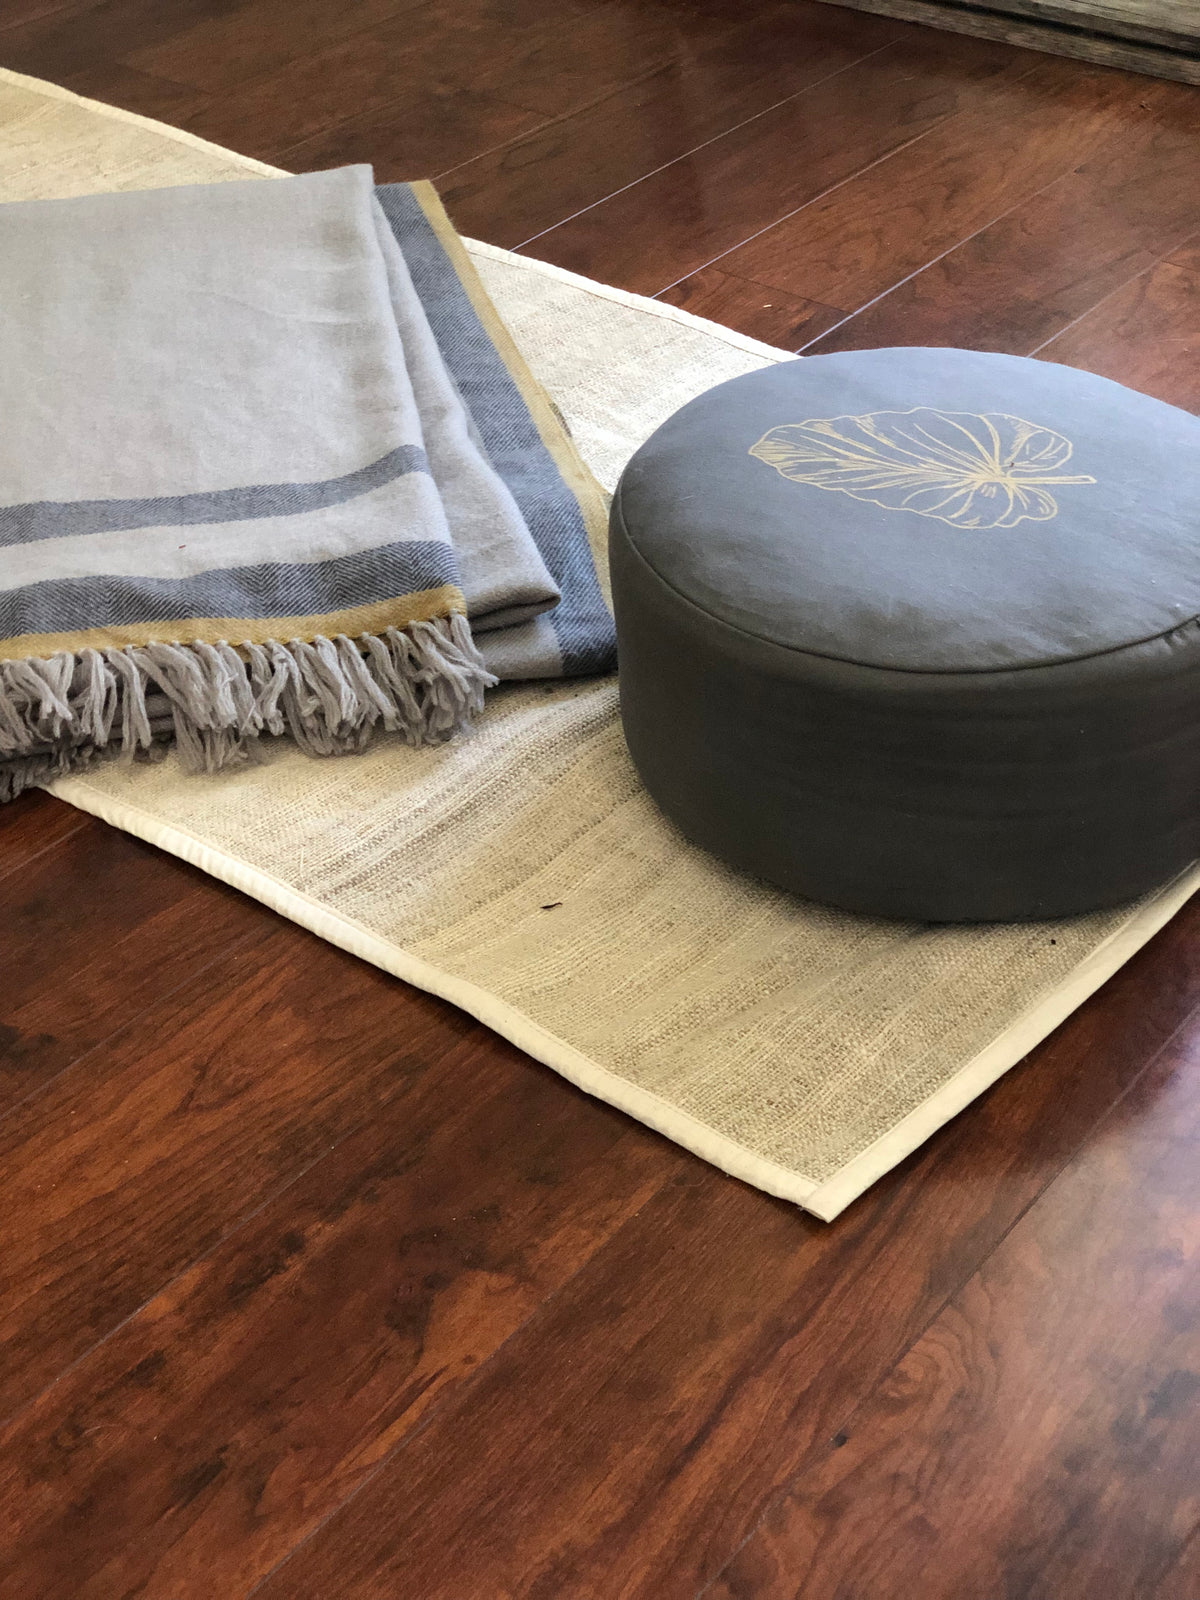 The Practitioner's  Bundle: Shawl, Mat and Cushion